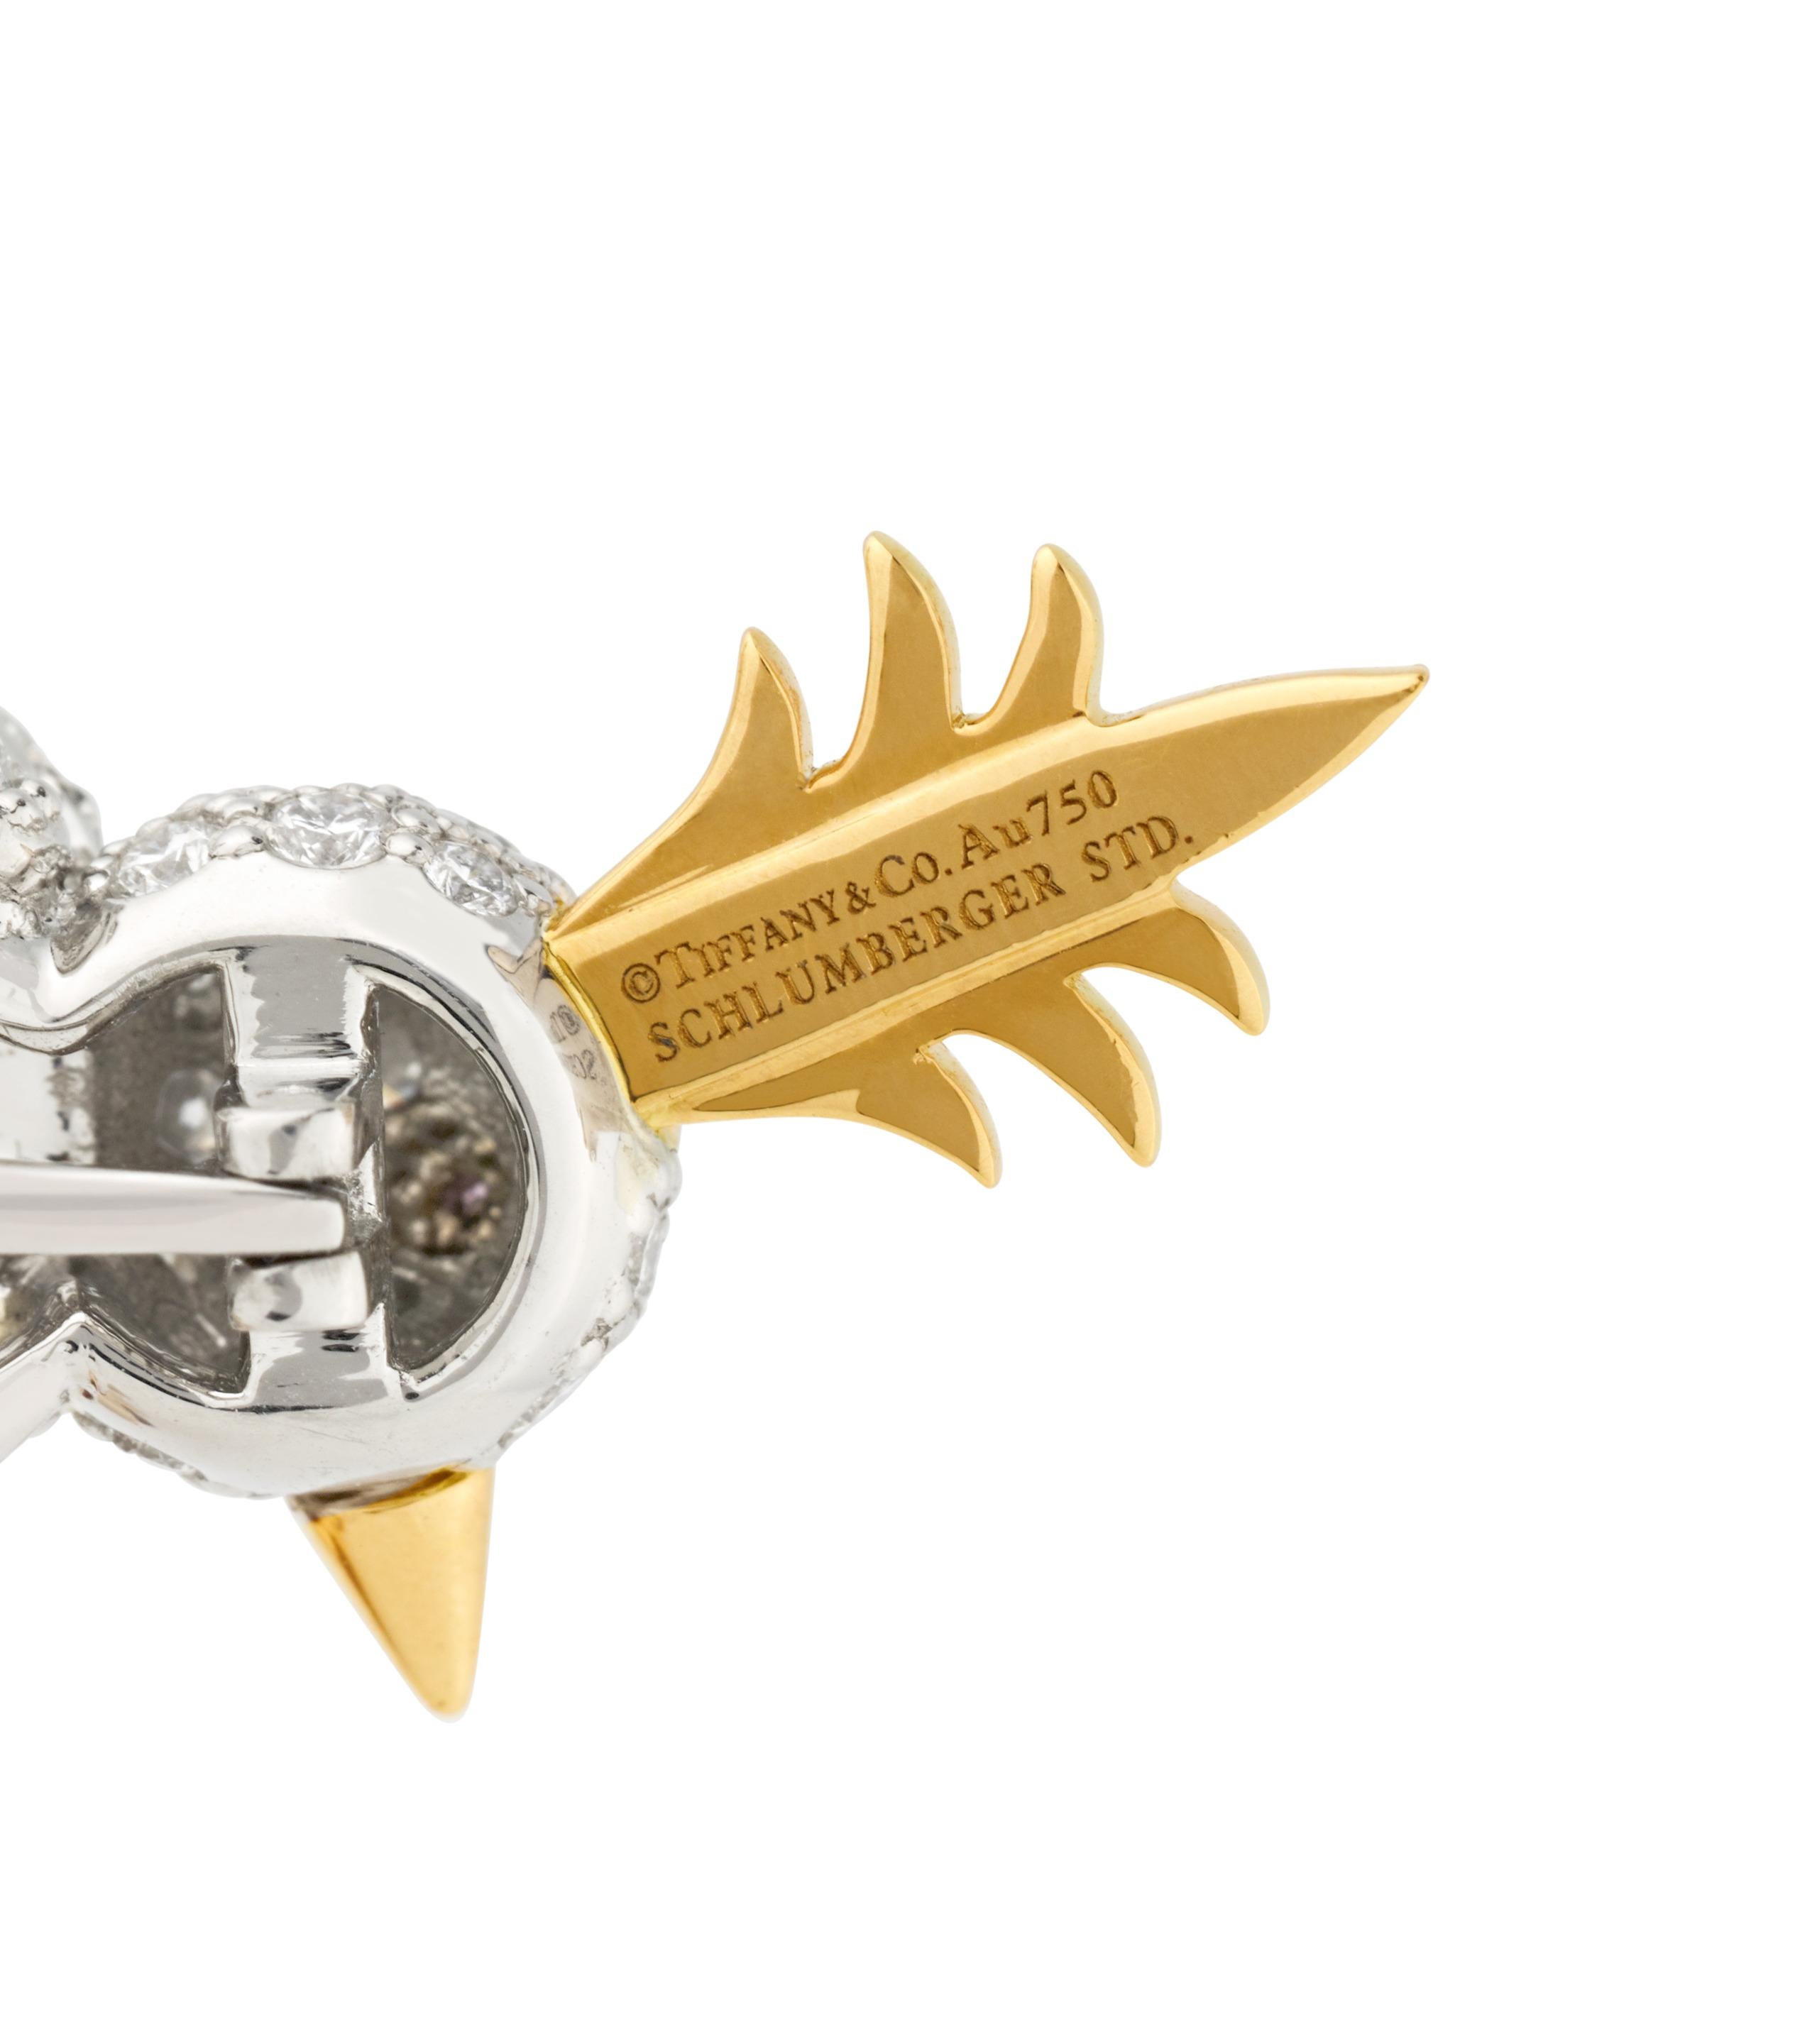 An iconic example of Jean Schlumberger’s charming designs for Tiffany & Co., this “bird on a rock” brooch features a 2.69-carat diamond-encrusted cockatoo perched on a dazzling nearly 60-carat citrine “rock.” The bird brooch is one of the firm’s